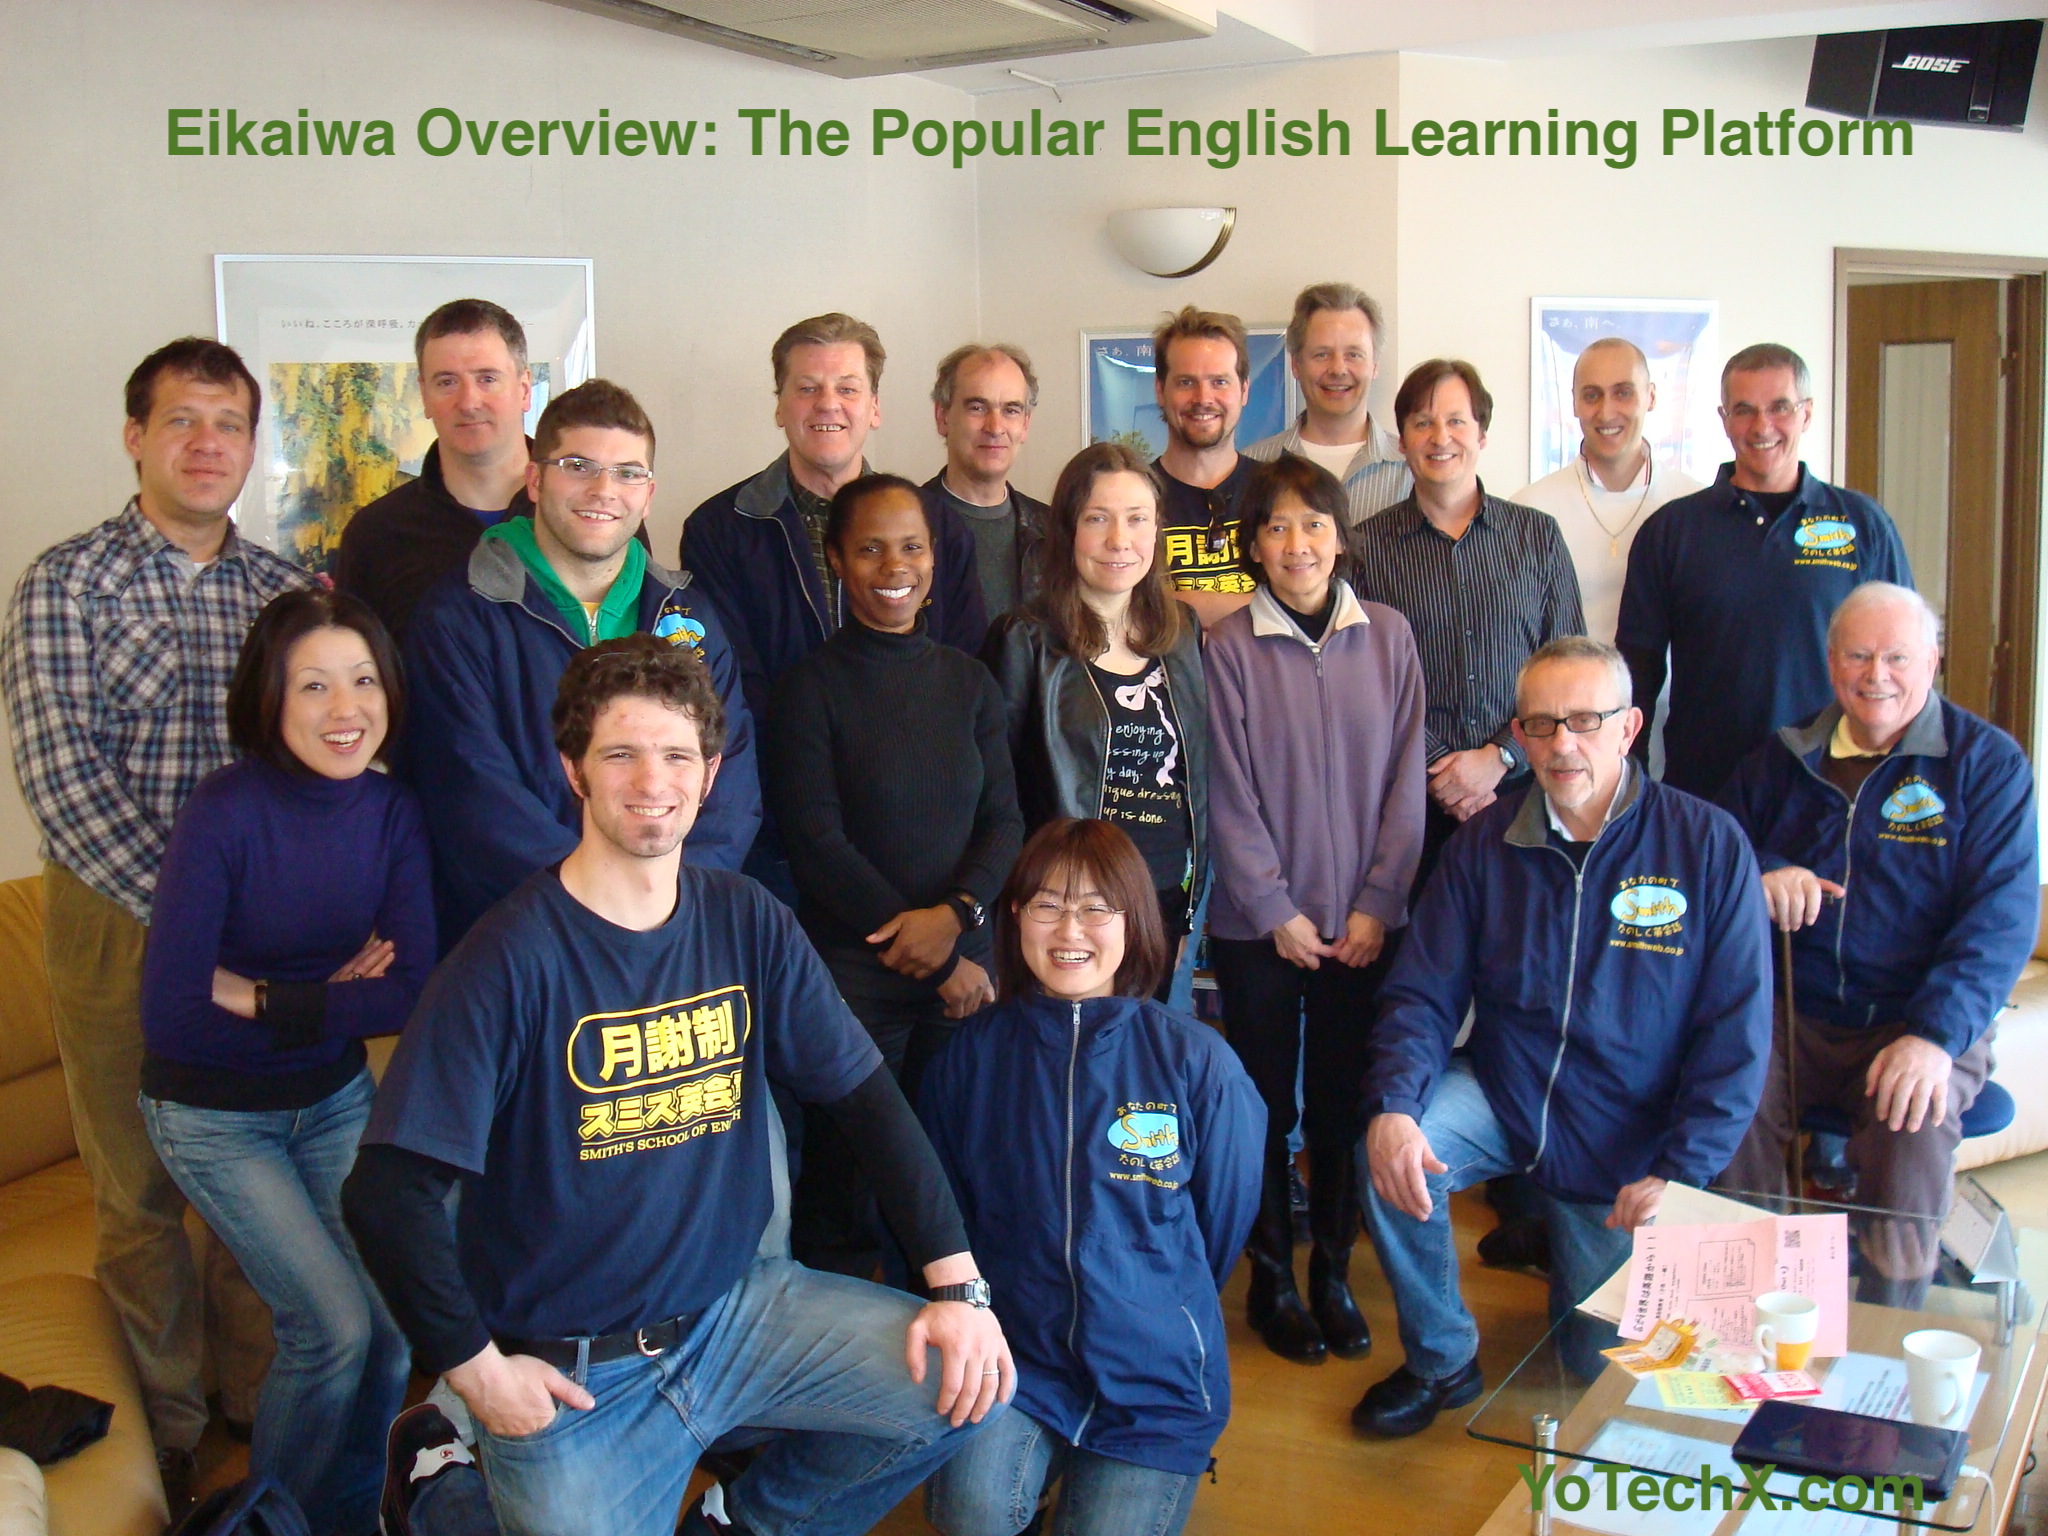 Eikaiwa Overview: All You Need To Know About The Popular English Learning Platform